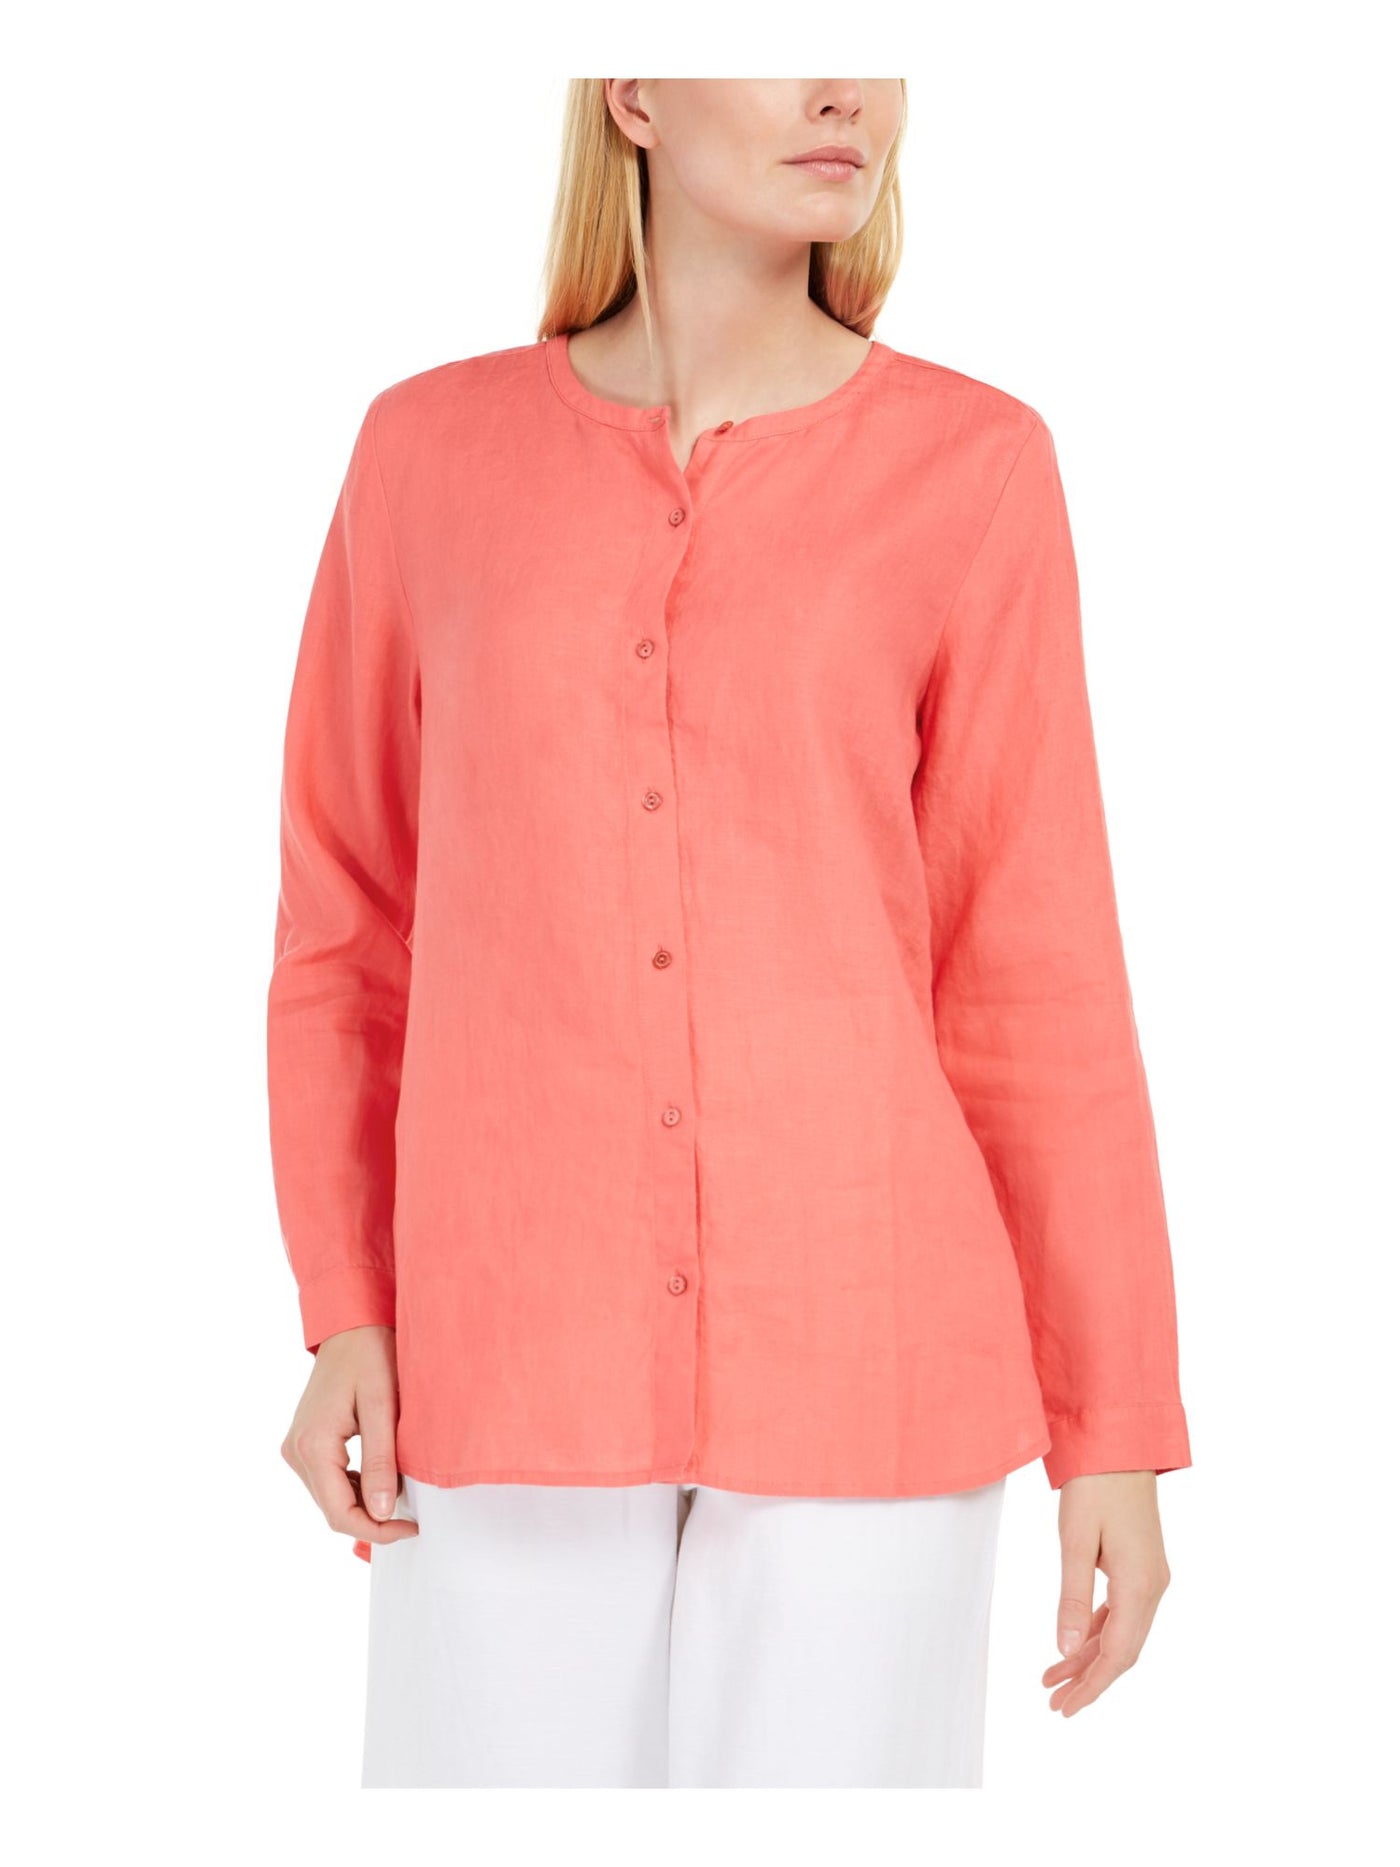 EILEEN FISHER Womens Coral Long Sleeve Jewel Neck Button Up Top M